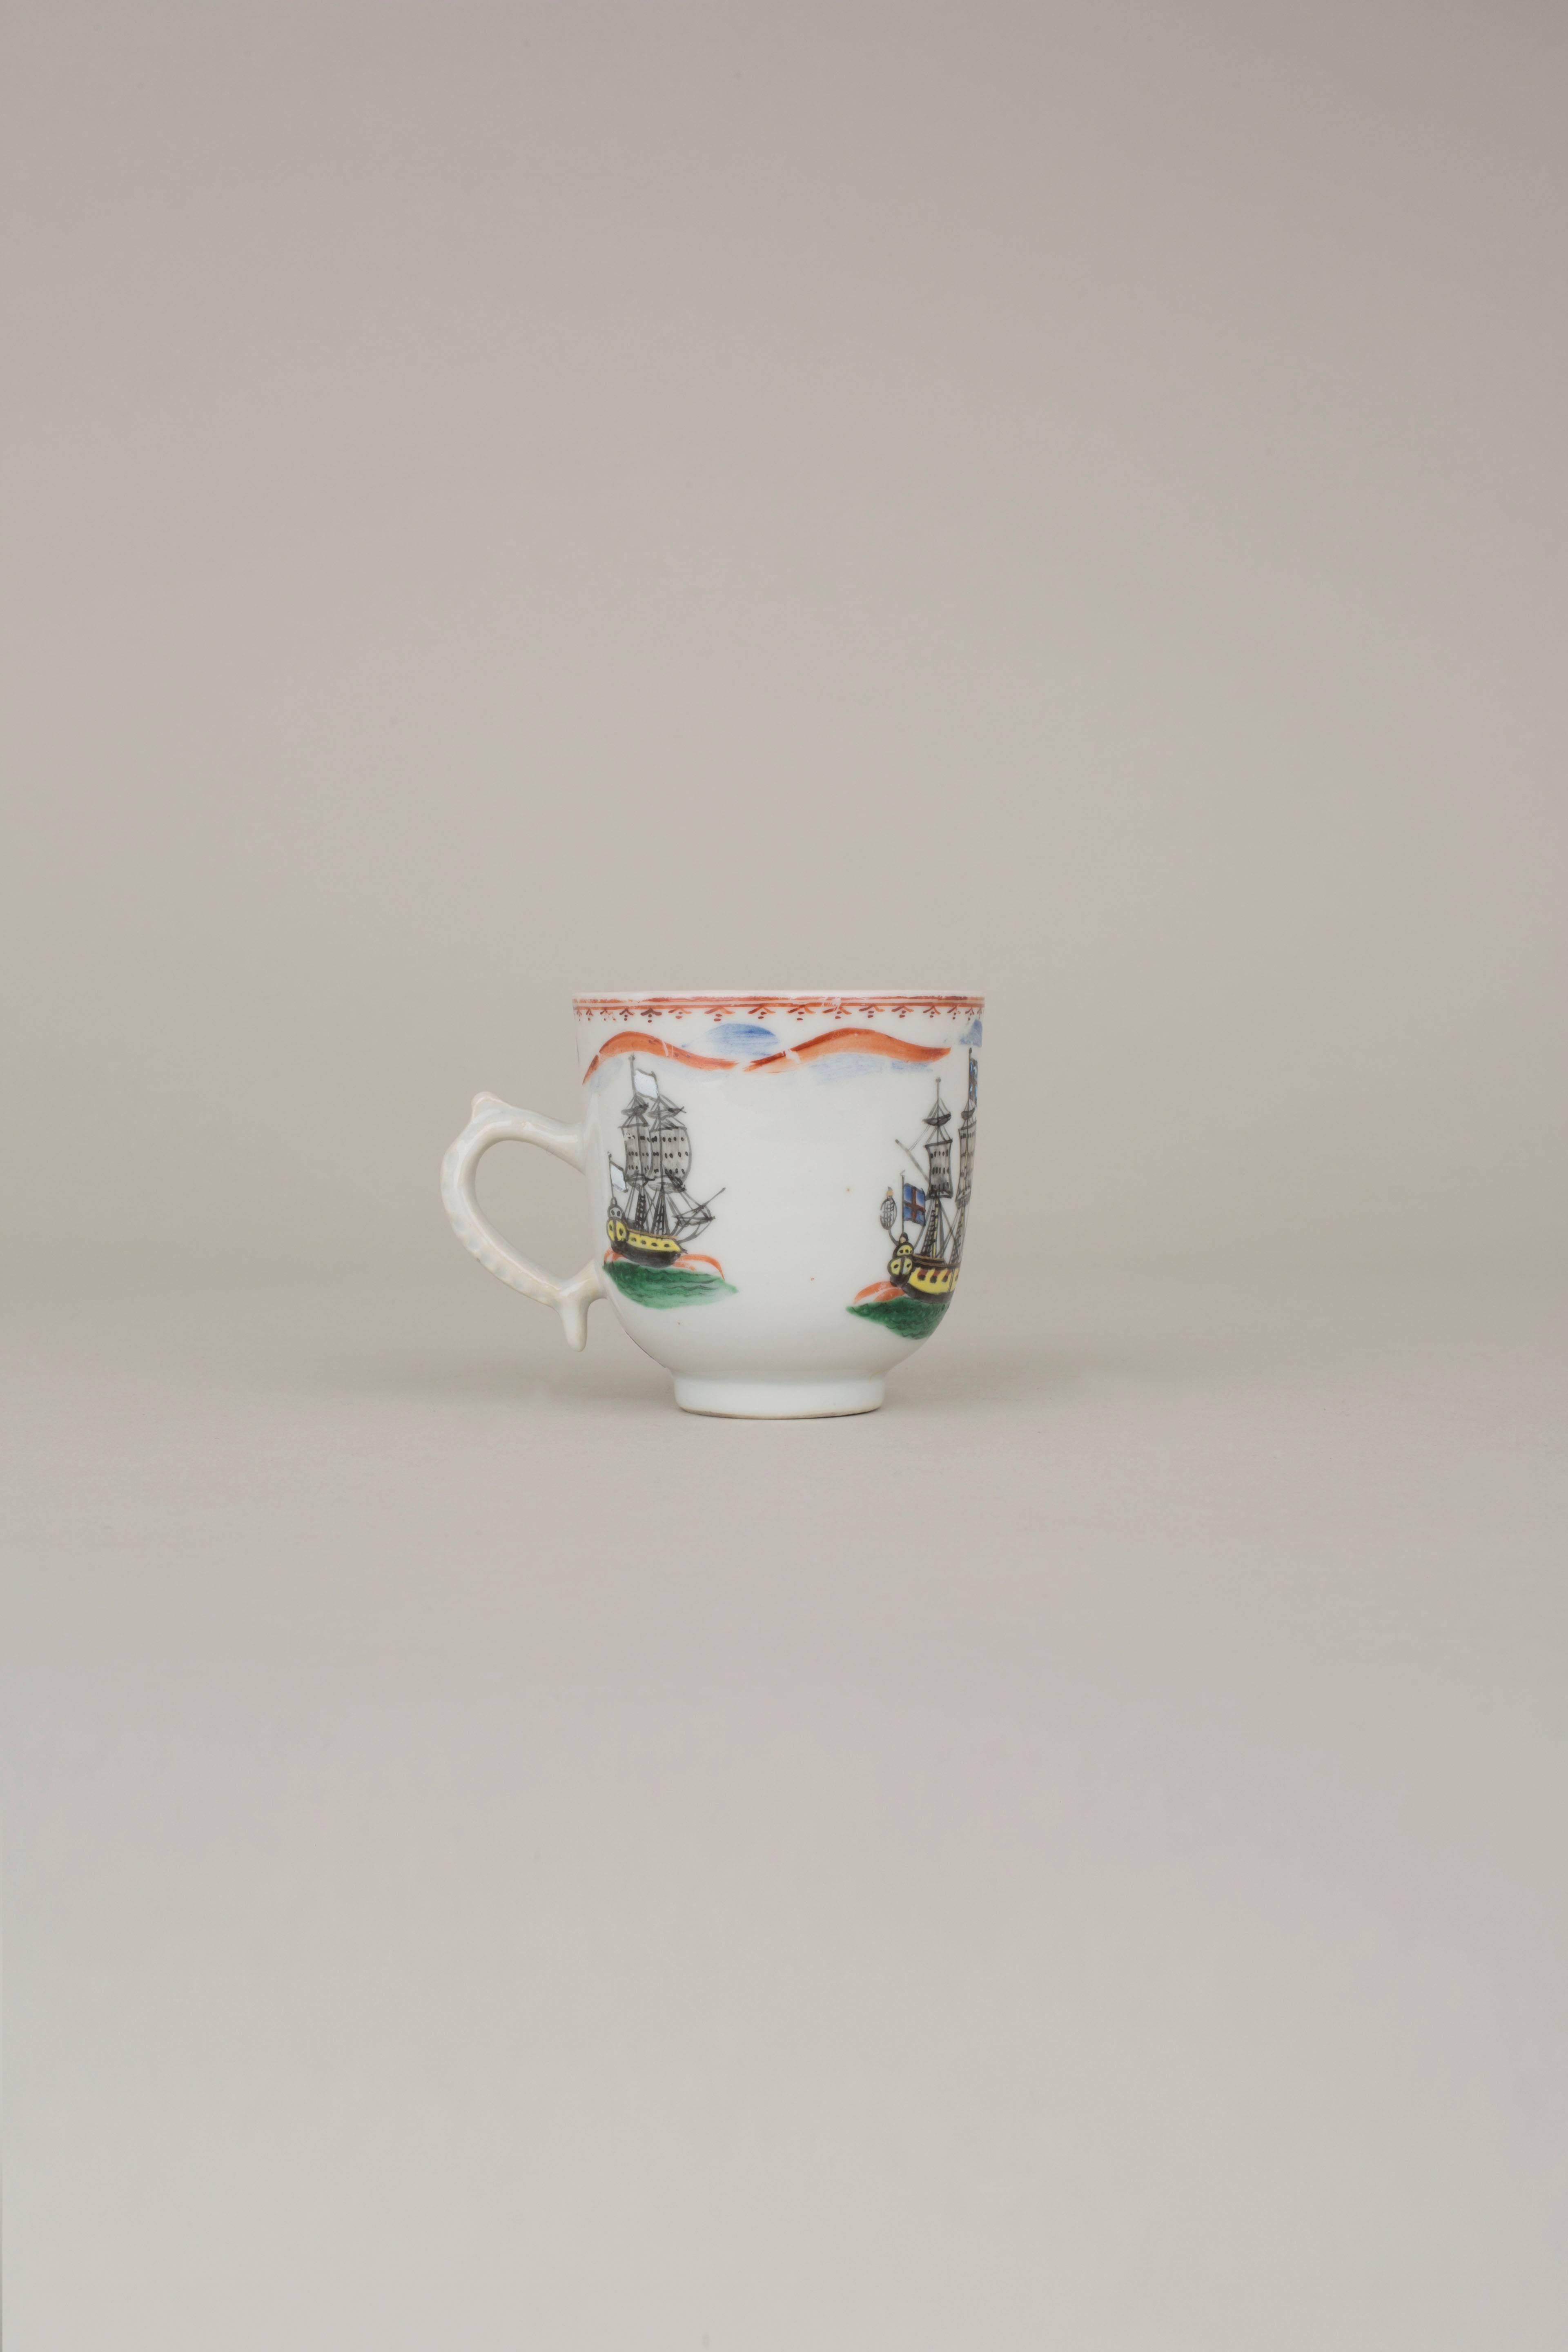 Qing Chinese Export Porcelain Coffee Cup with Three Ships and Flags, 18th Century For Sale